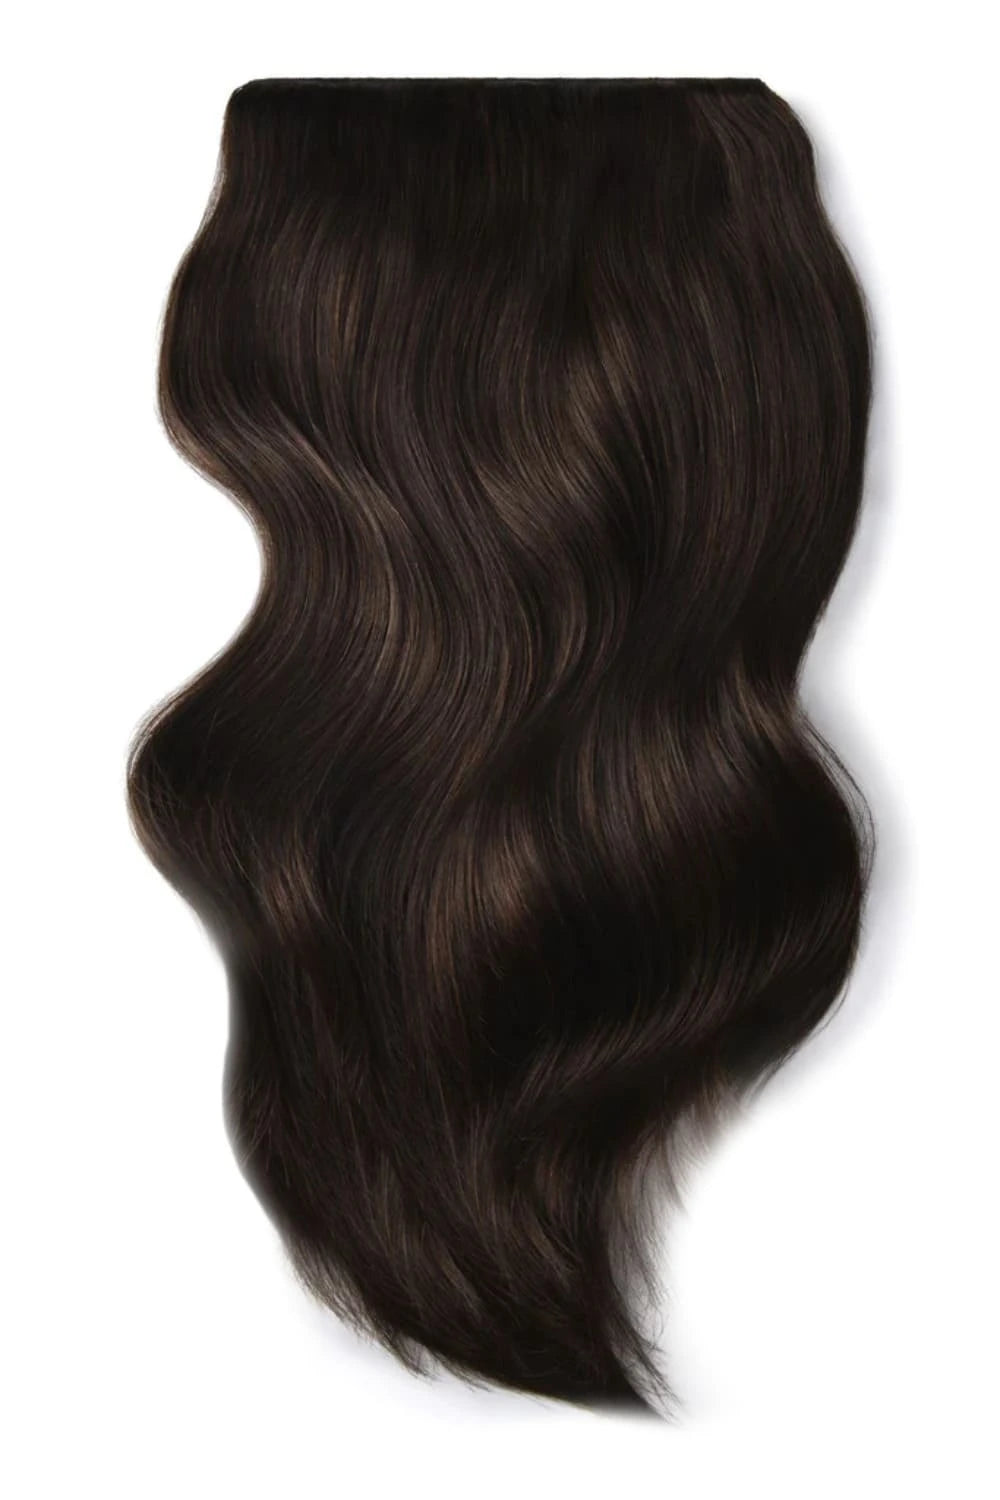 Double Wefted Full Head Remy Clip in Human Hair Extensions - Darkest Brown (#2)